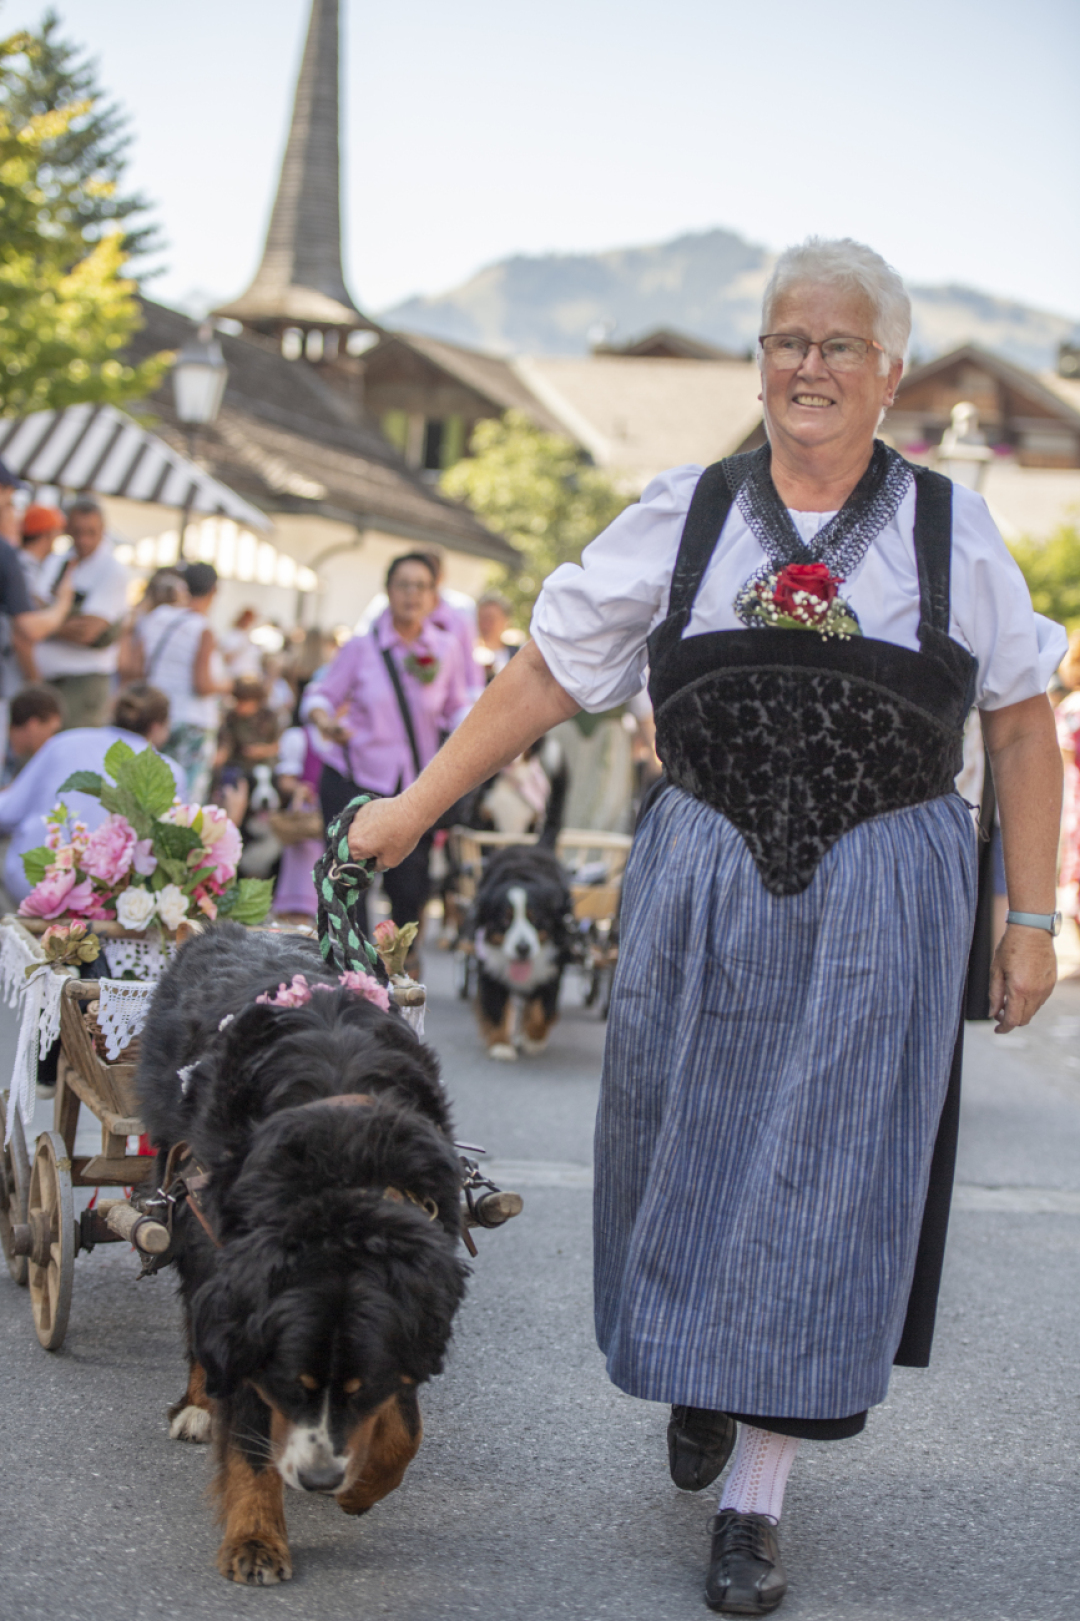 Friday was parade day in Gstaad | Photo Kathrin Gralla